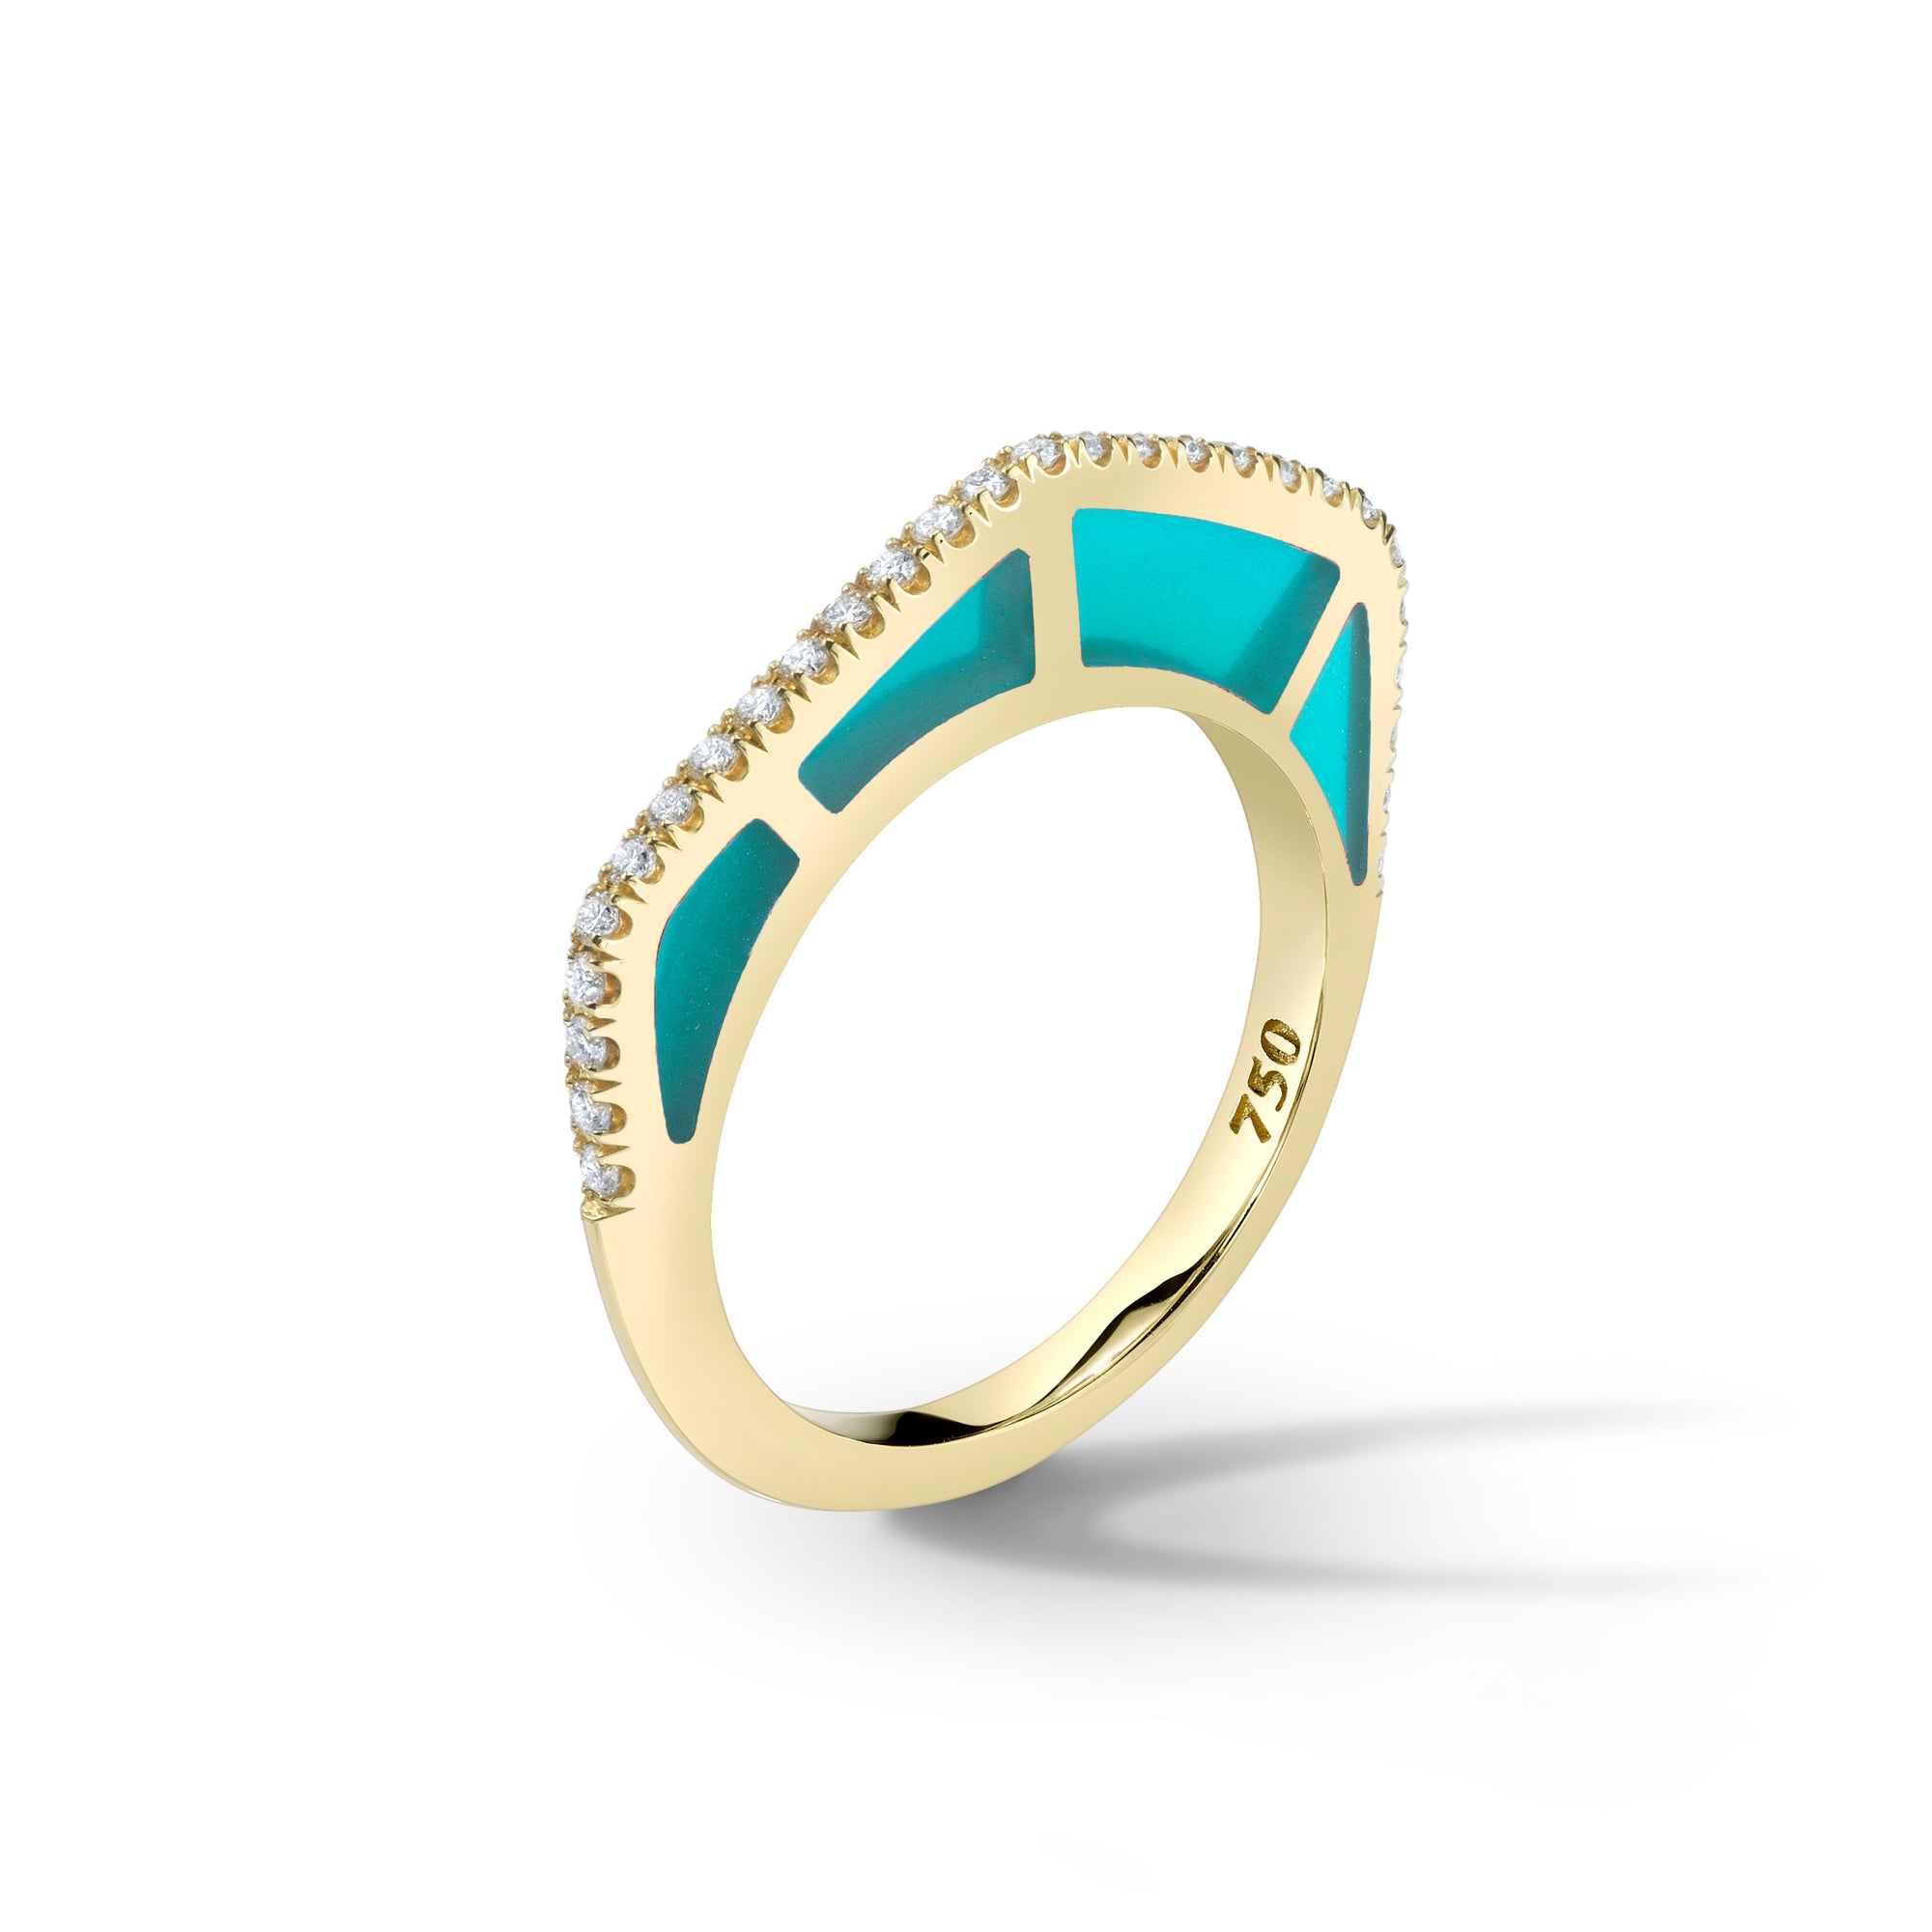 Raffle entry; Cobra Ring with Light Blue Enamel and Diamond Pave